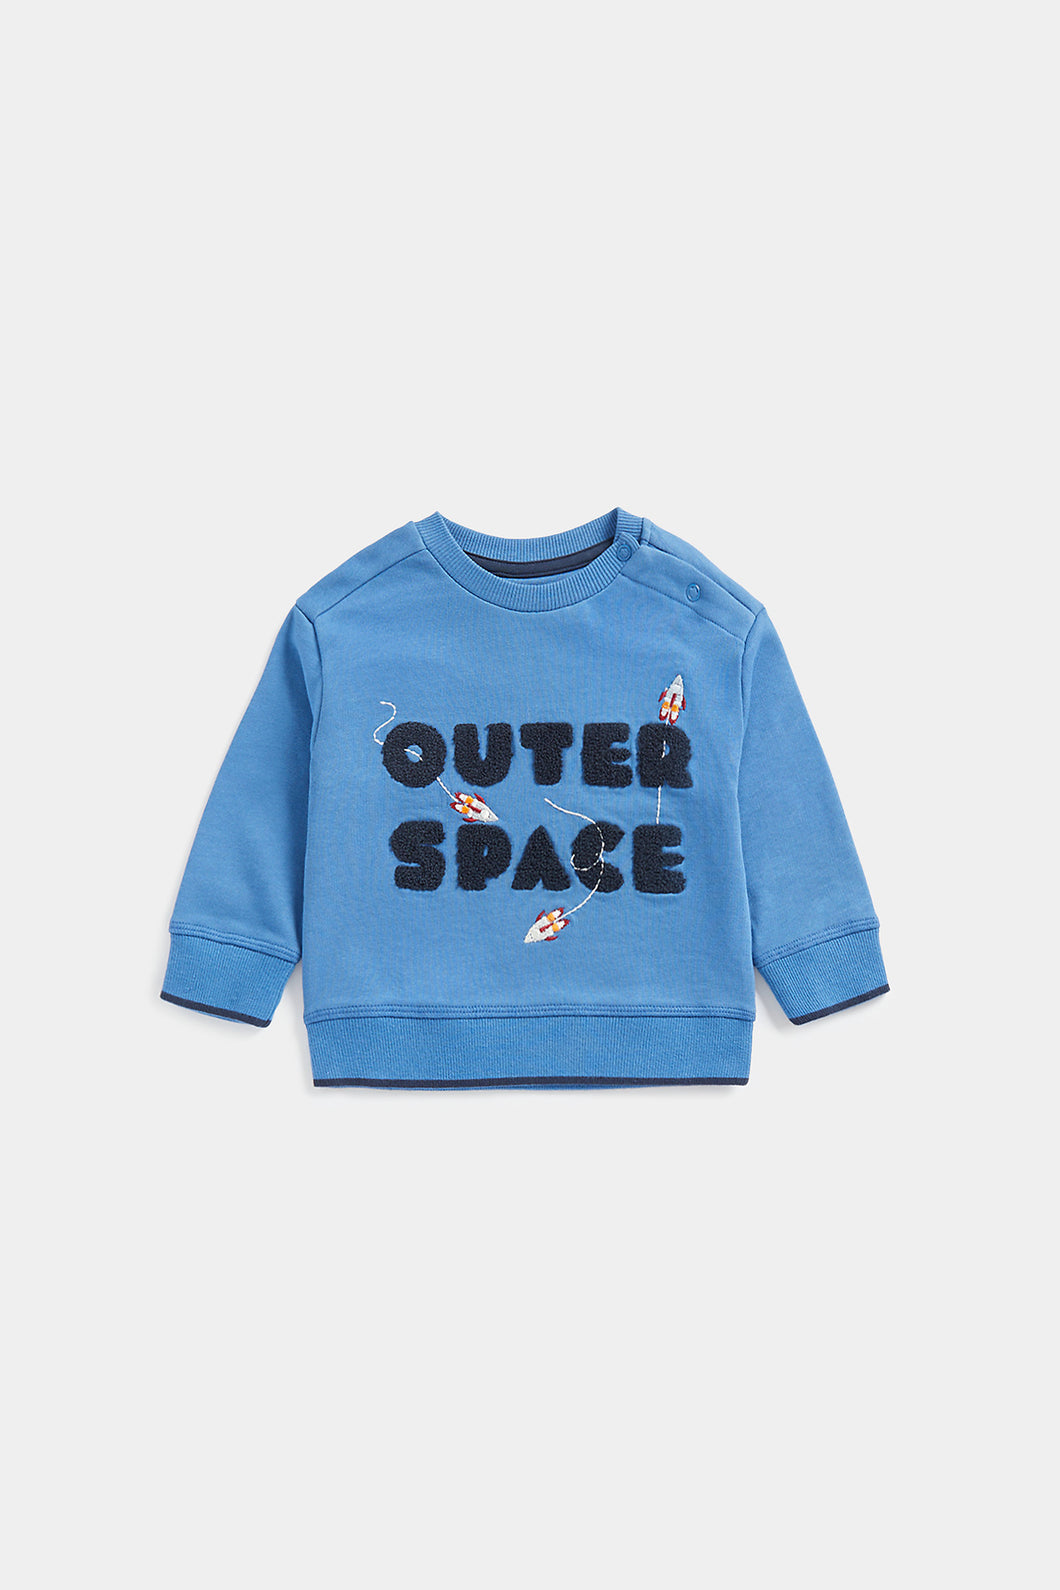 Mothercare Outer Space Sweat Top